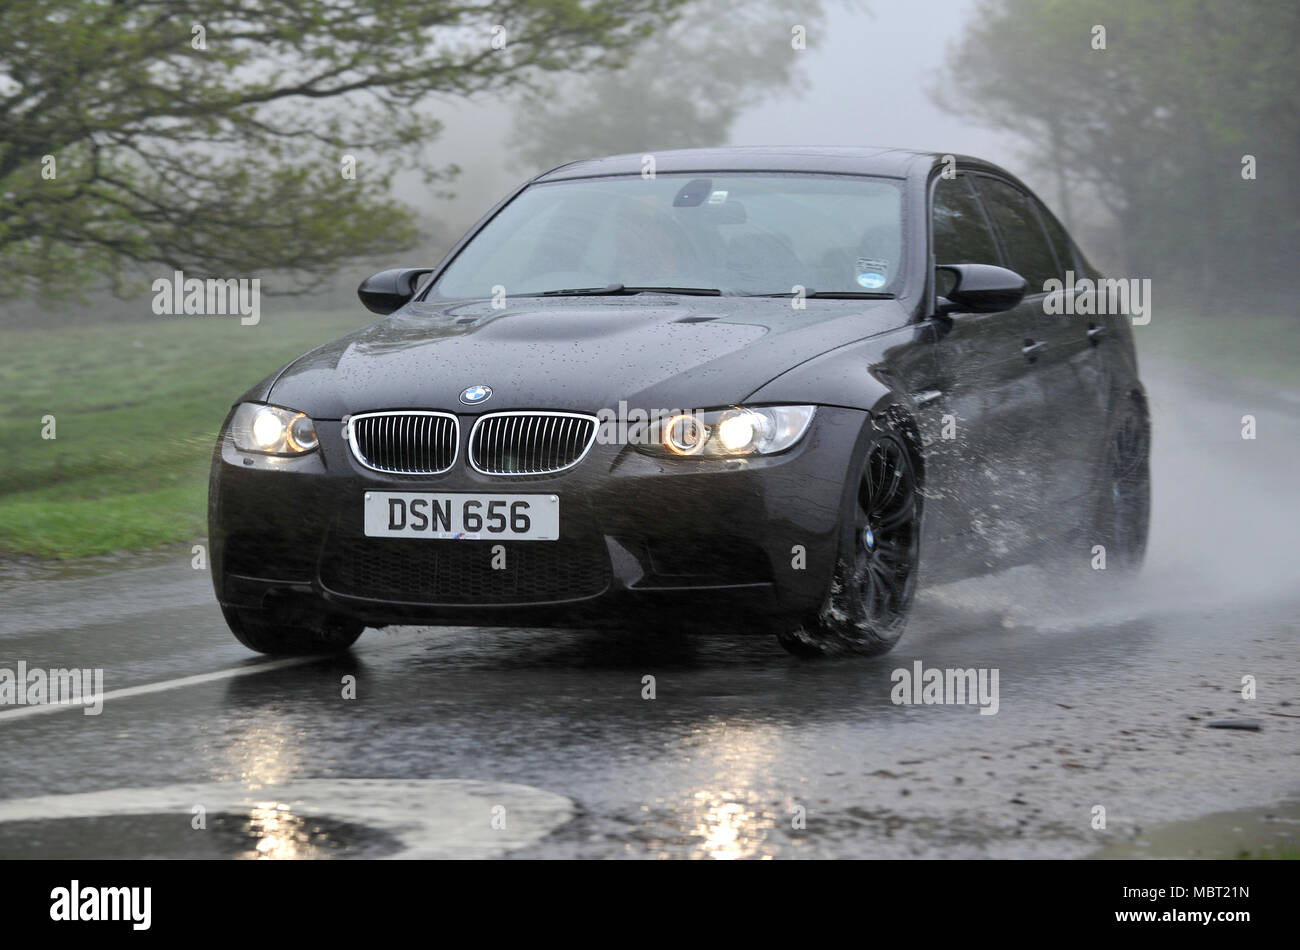 E92 BMW M3 sports saloon car, all black 'murdered out' look Stock Photo